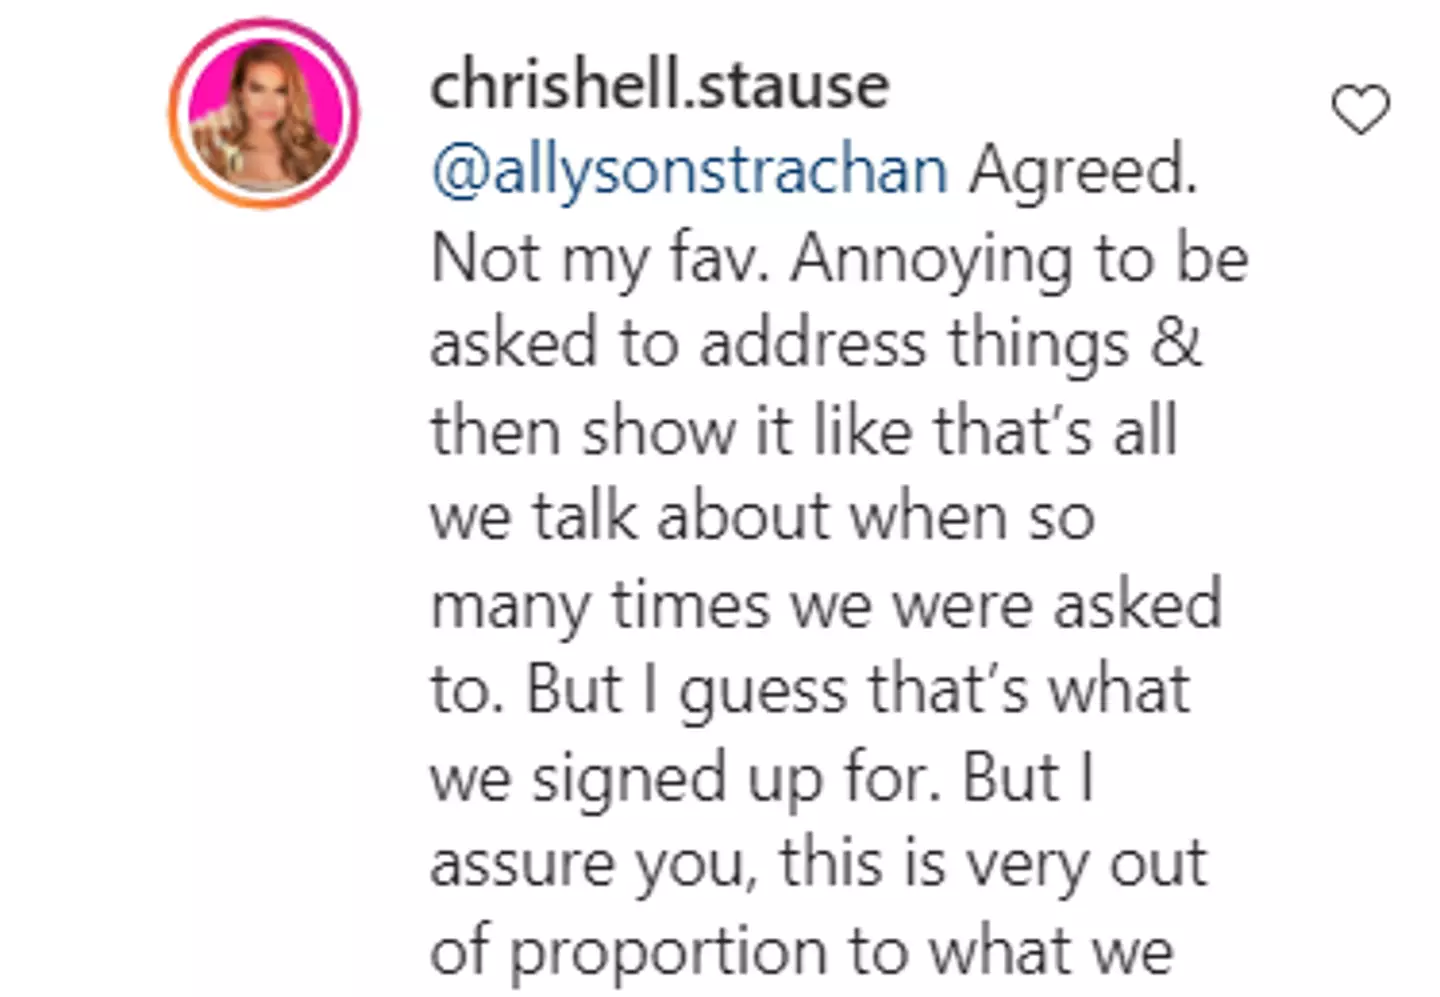 Chrishell replied to a comment about how the last season has been (